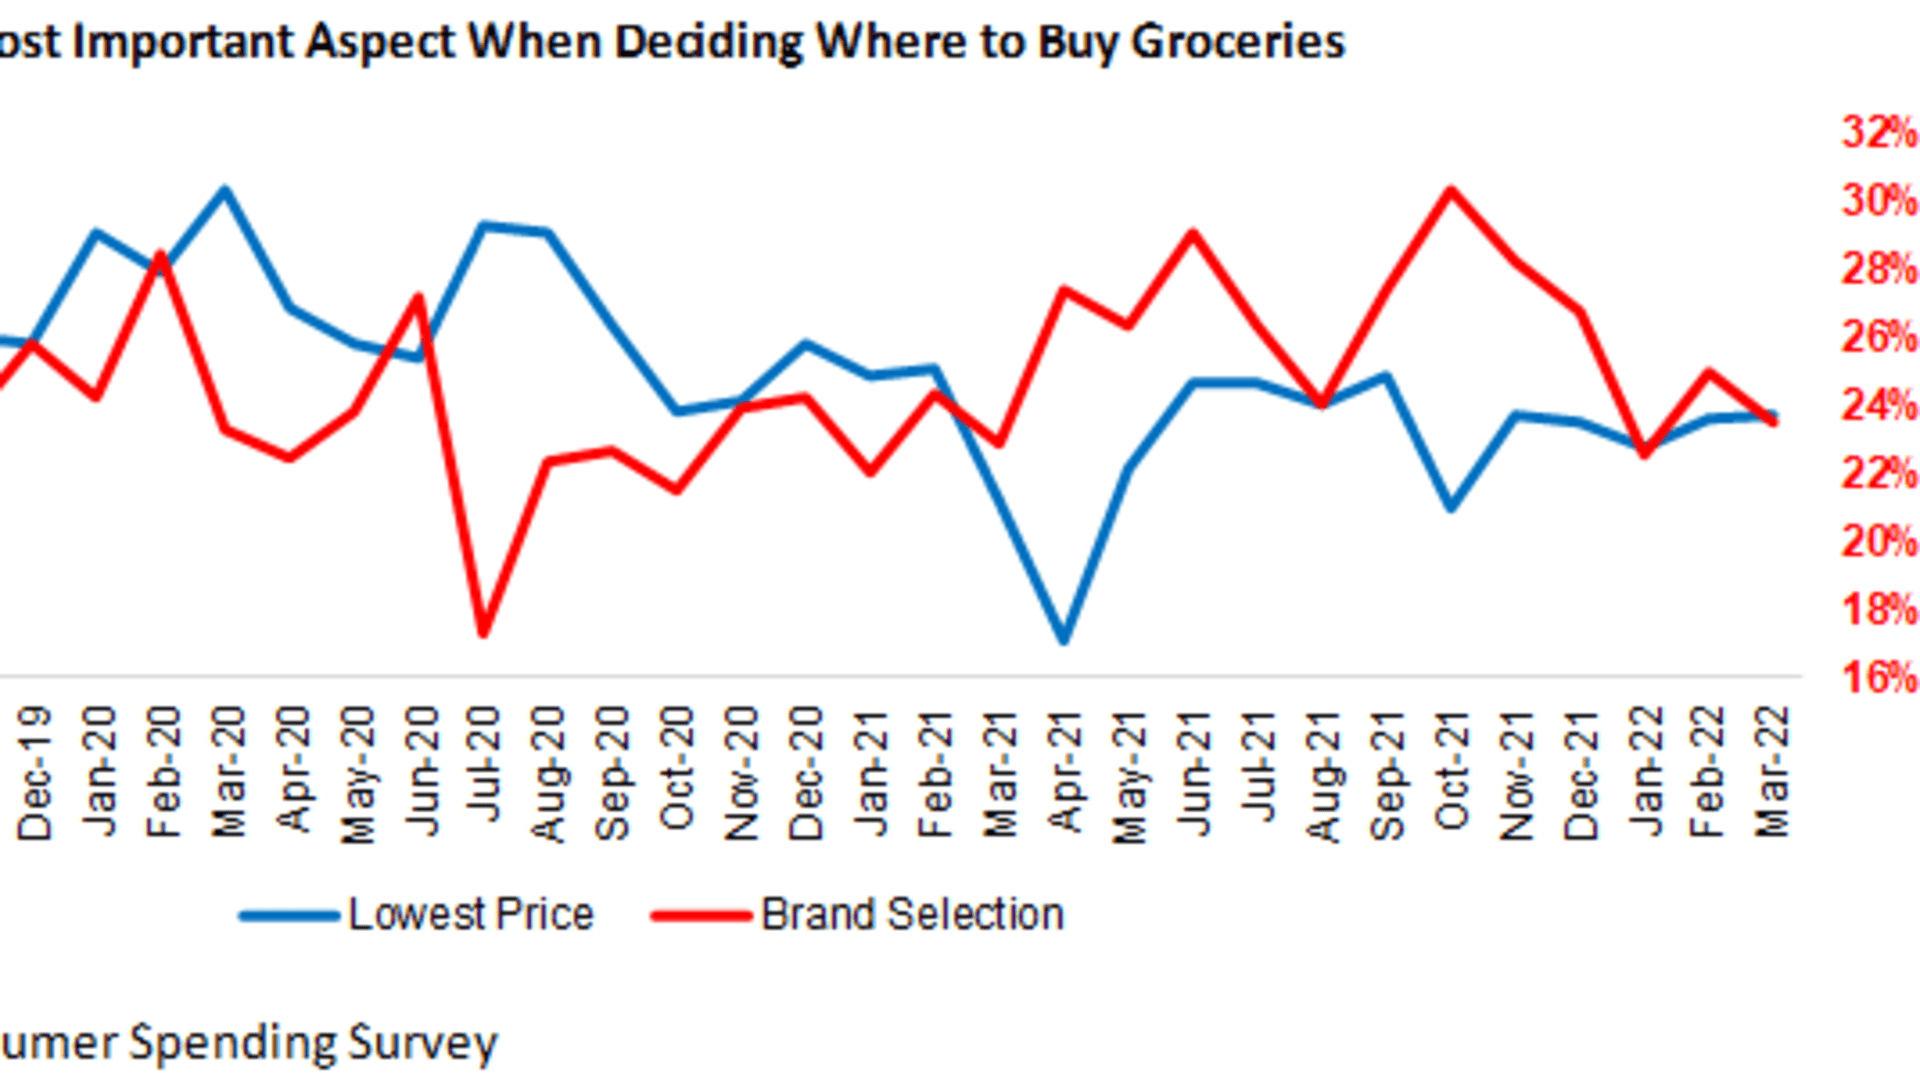 Wall Street and the C-suite are concerned that the consumer breaking point in grocery store pricing is near.